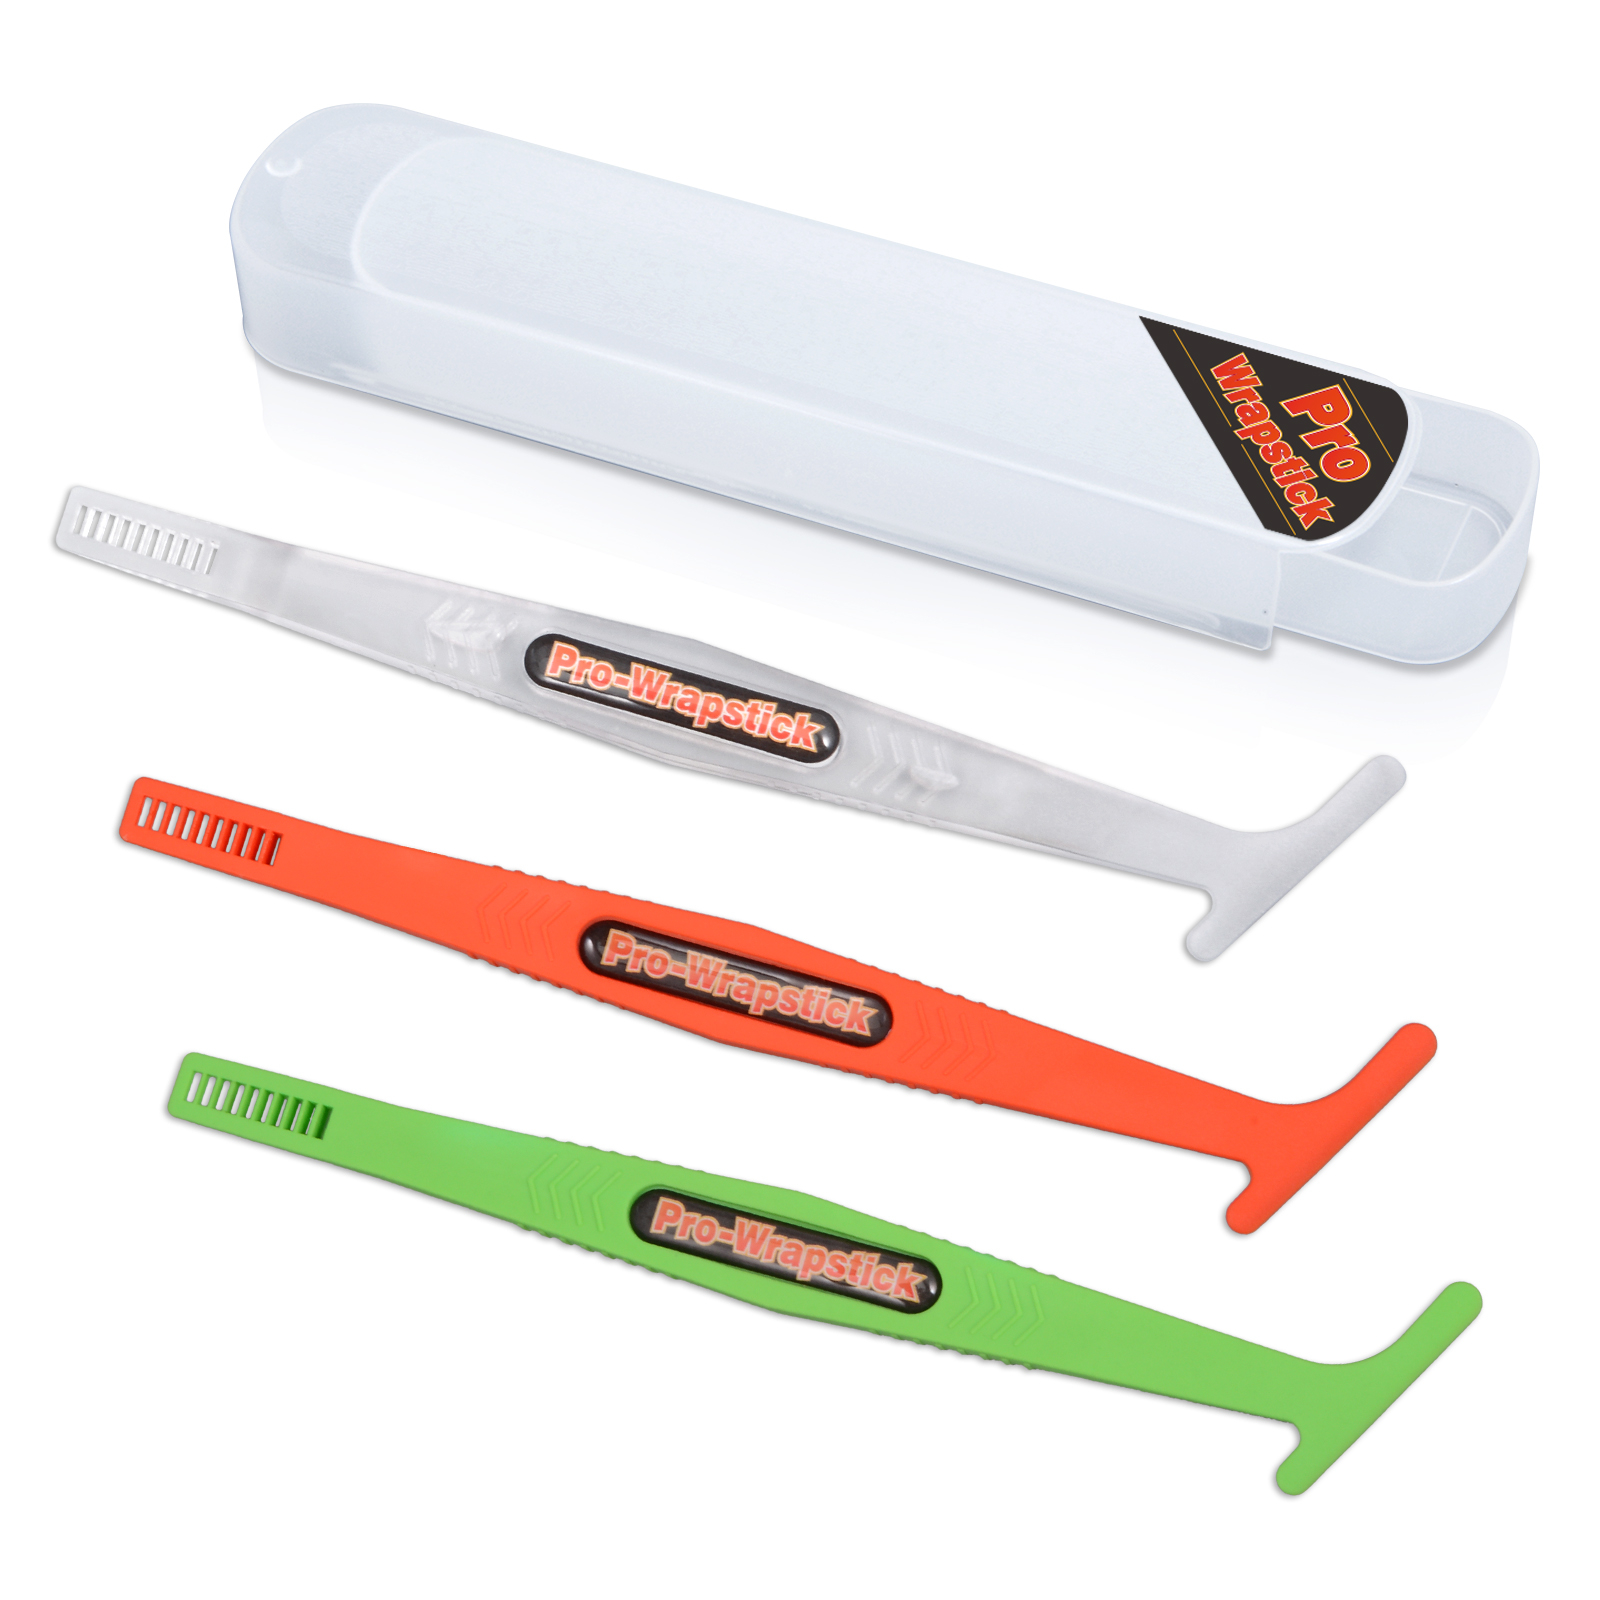 3 in 1 Wrap Sticks with Magnet and Wrap Slit Cut Clipper Design with 3 Hardness (100 / 83 / 72 Degree Shores)